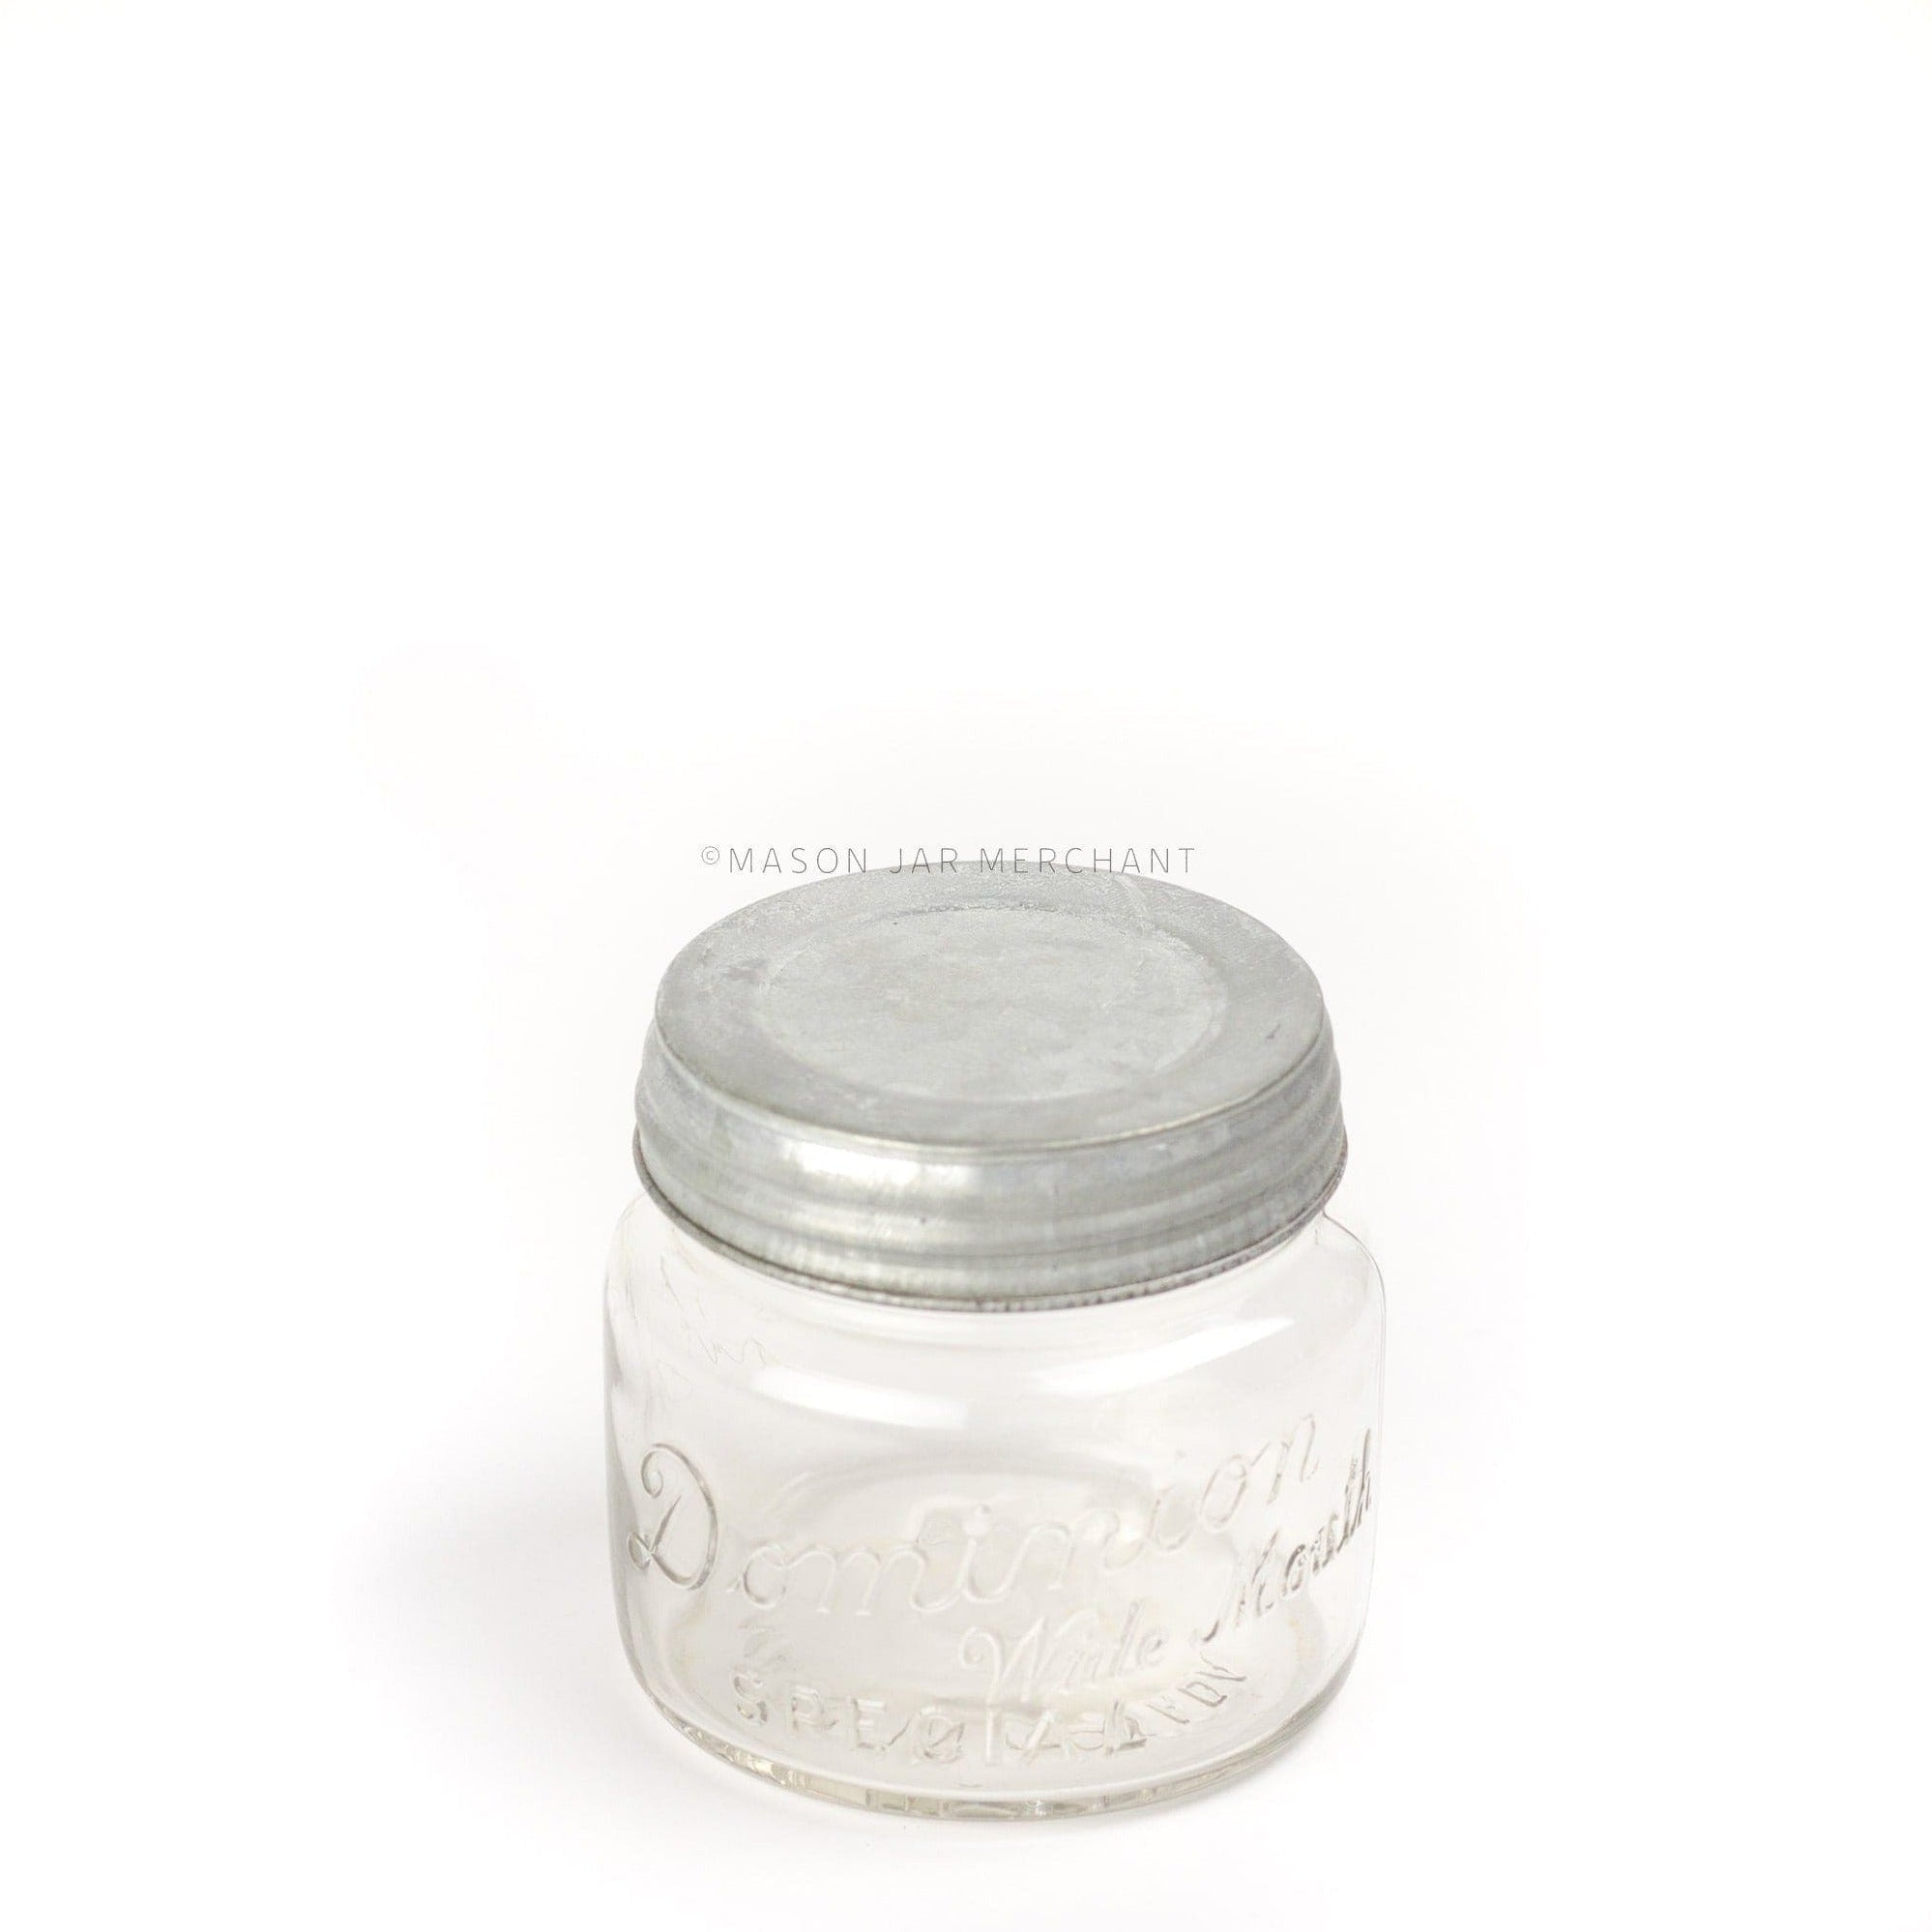 a close up of a rustic galvanized wide mouth lid on a glass mason jar on a white background